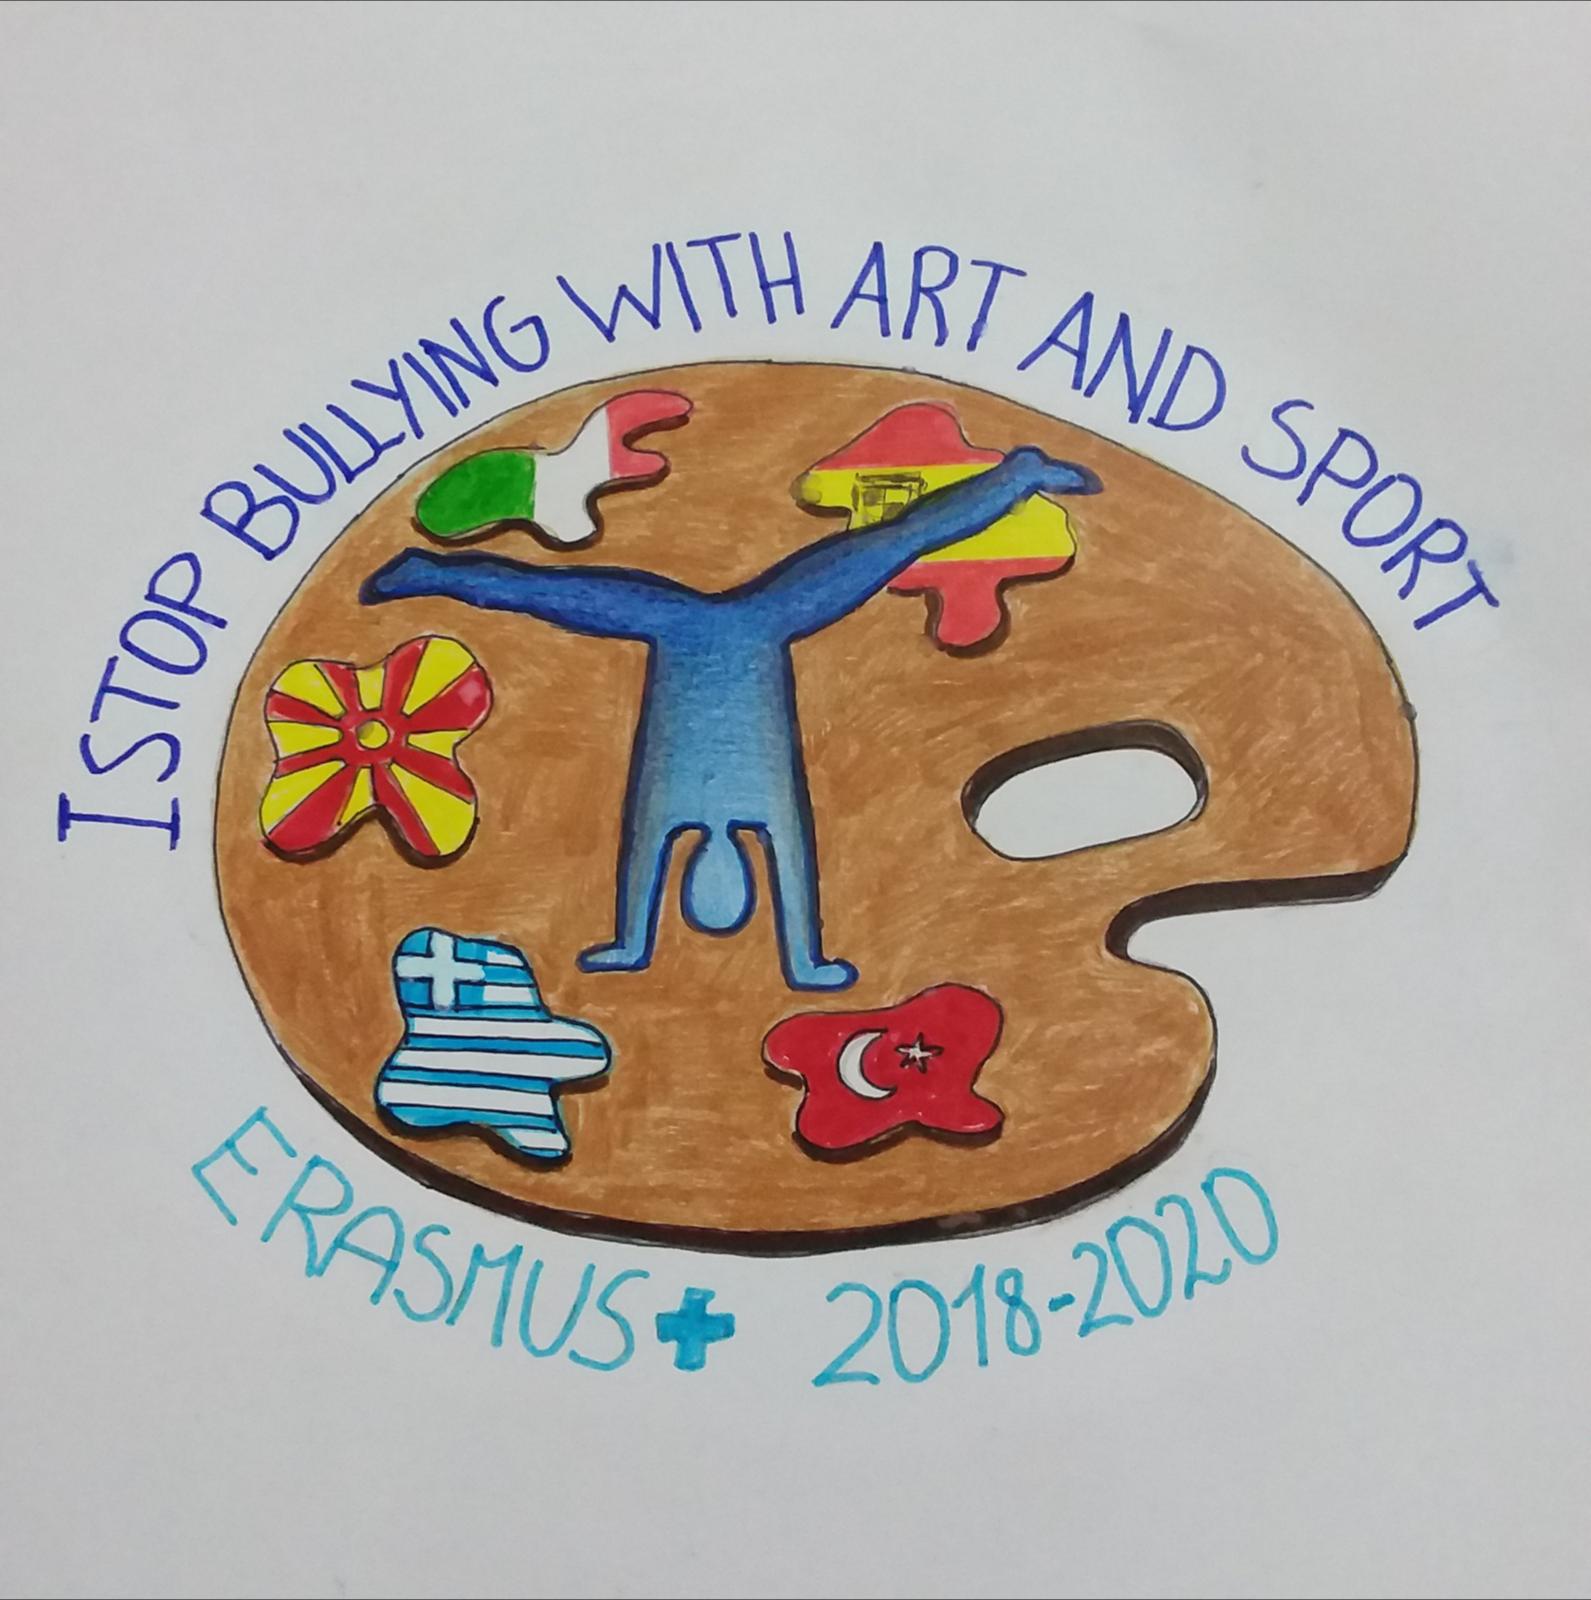 I STOP BULLYING WITH ART AND SPORT